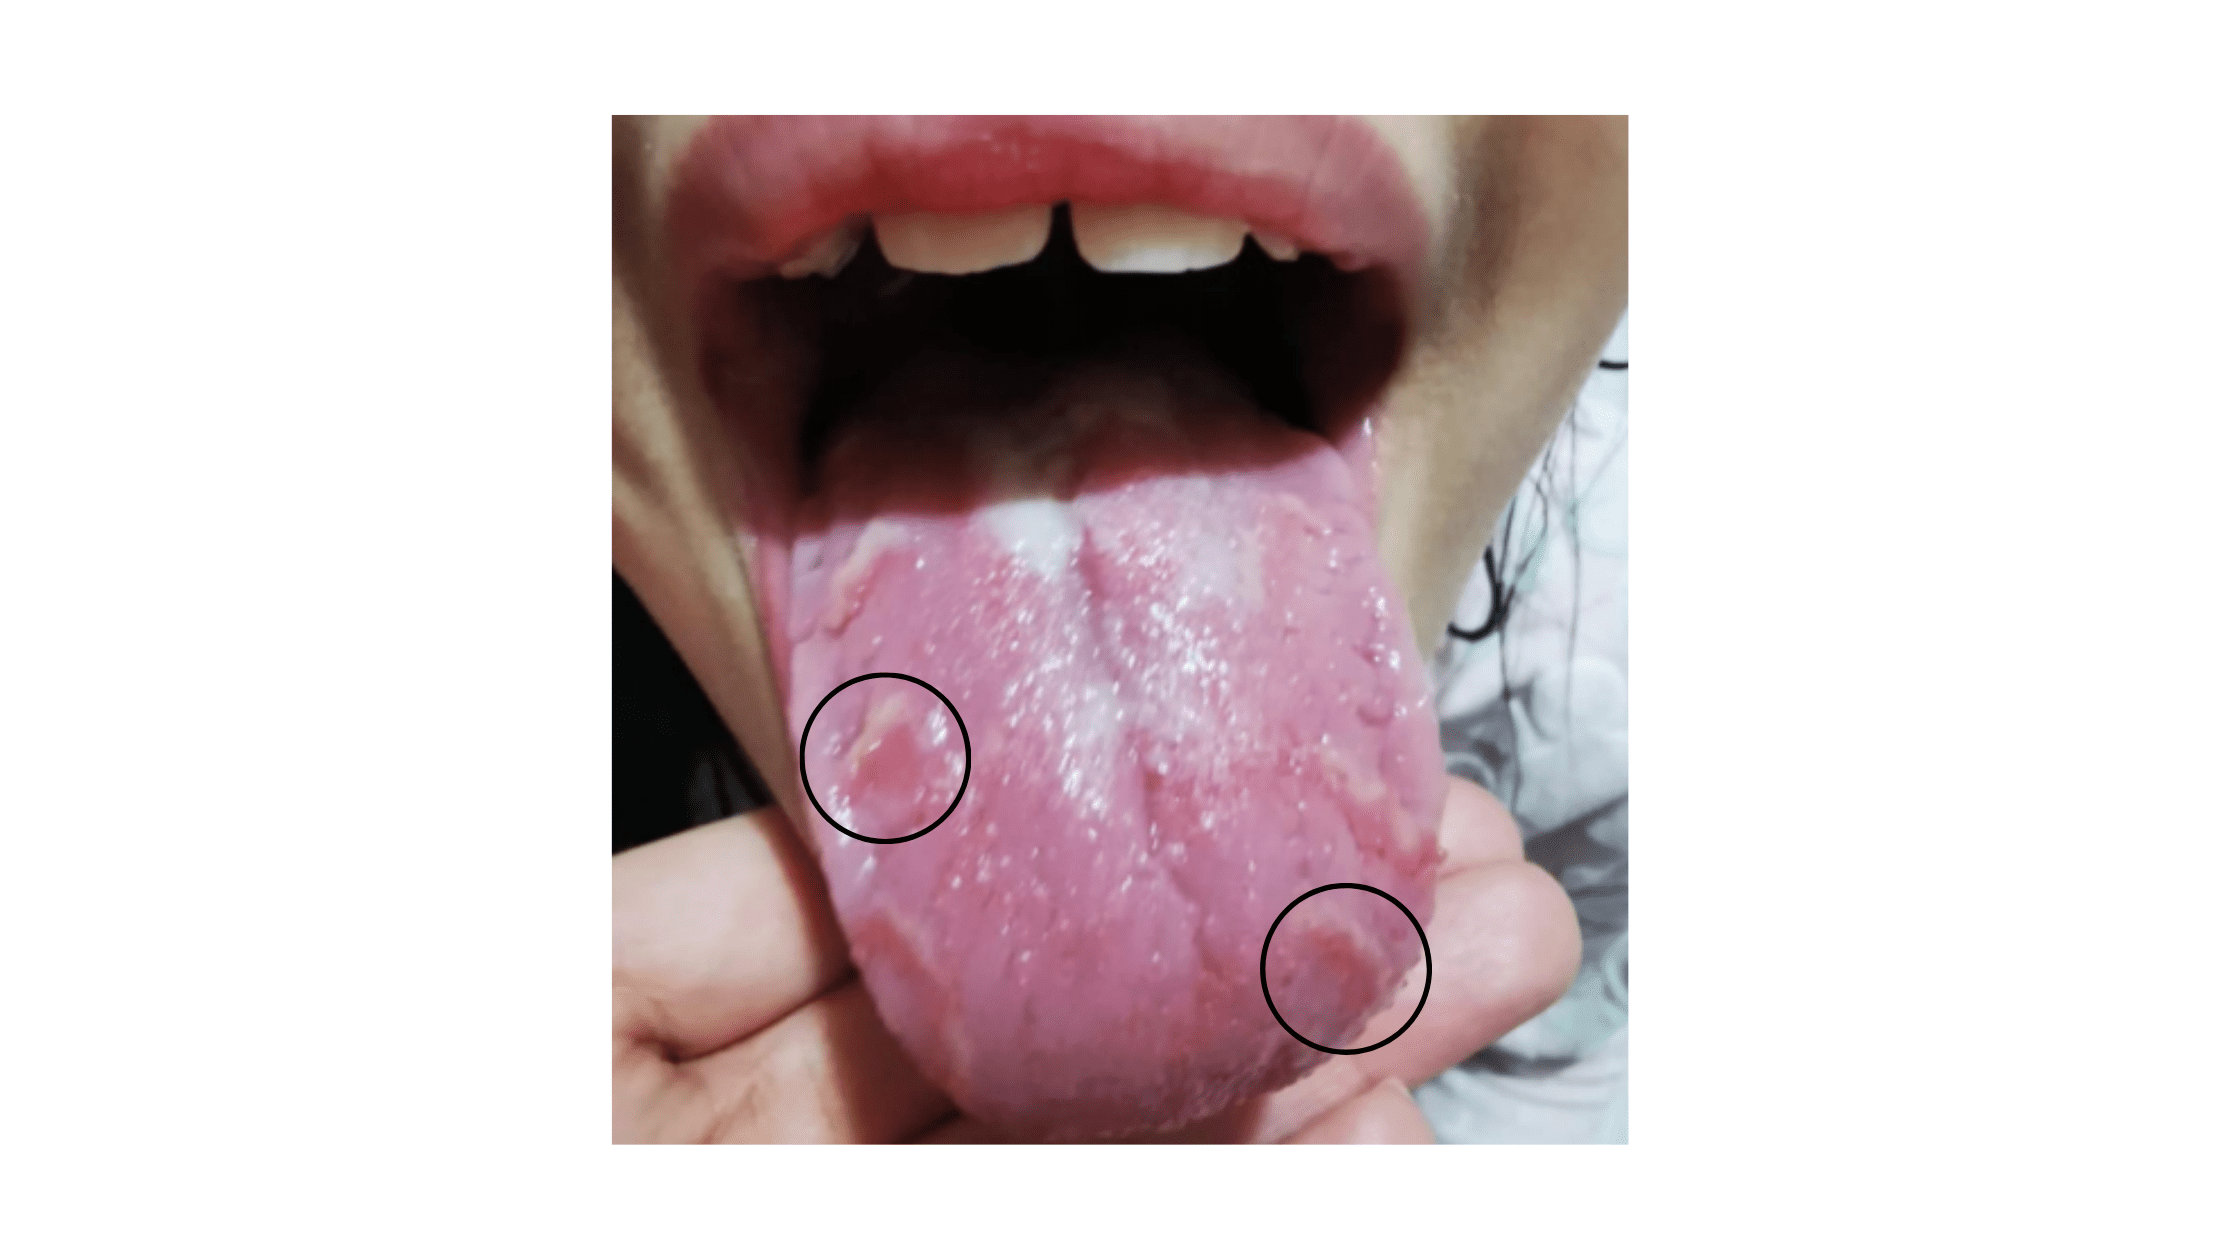 Clinical case of geographic tongue